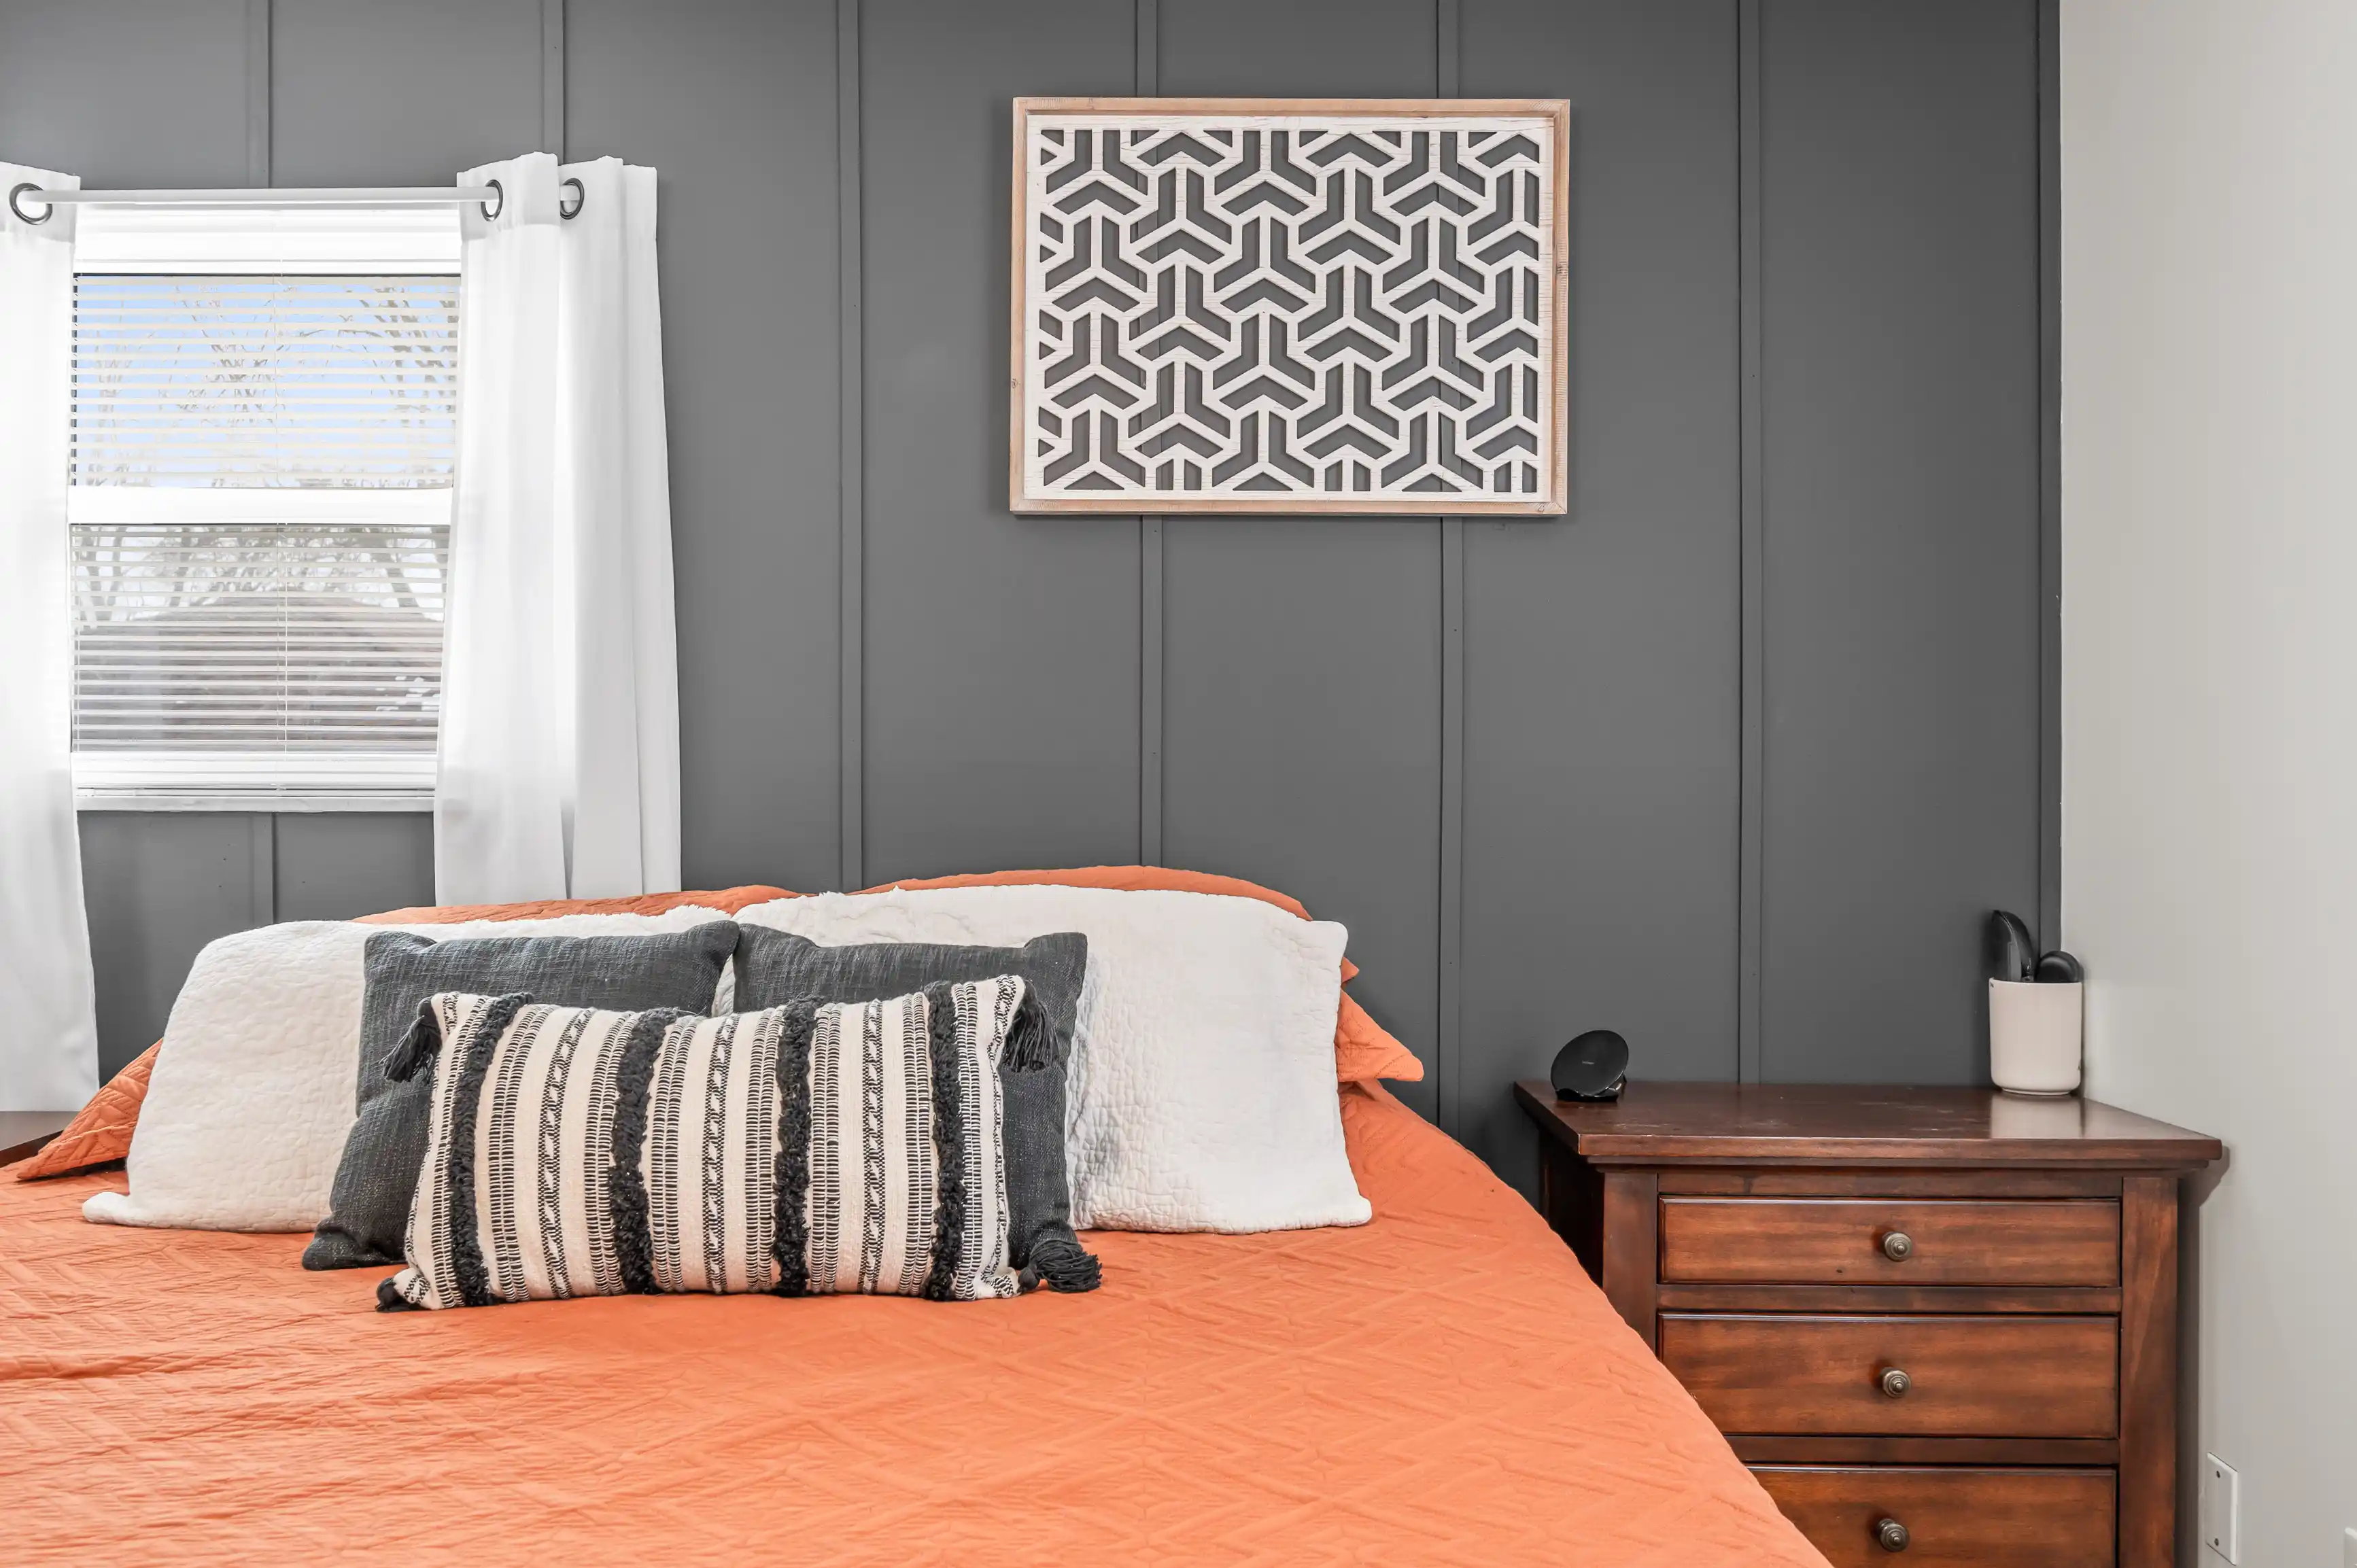 Modern bedroom with an orange bedspread, decorative pillows, a wooden nightstand, and a geometric pattern art piece on a gray wall.